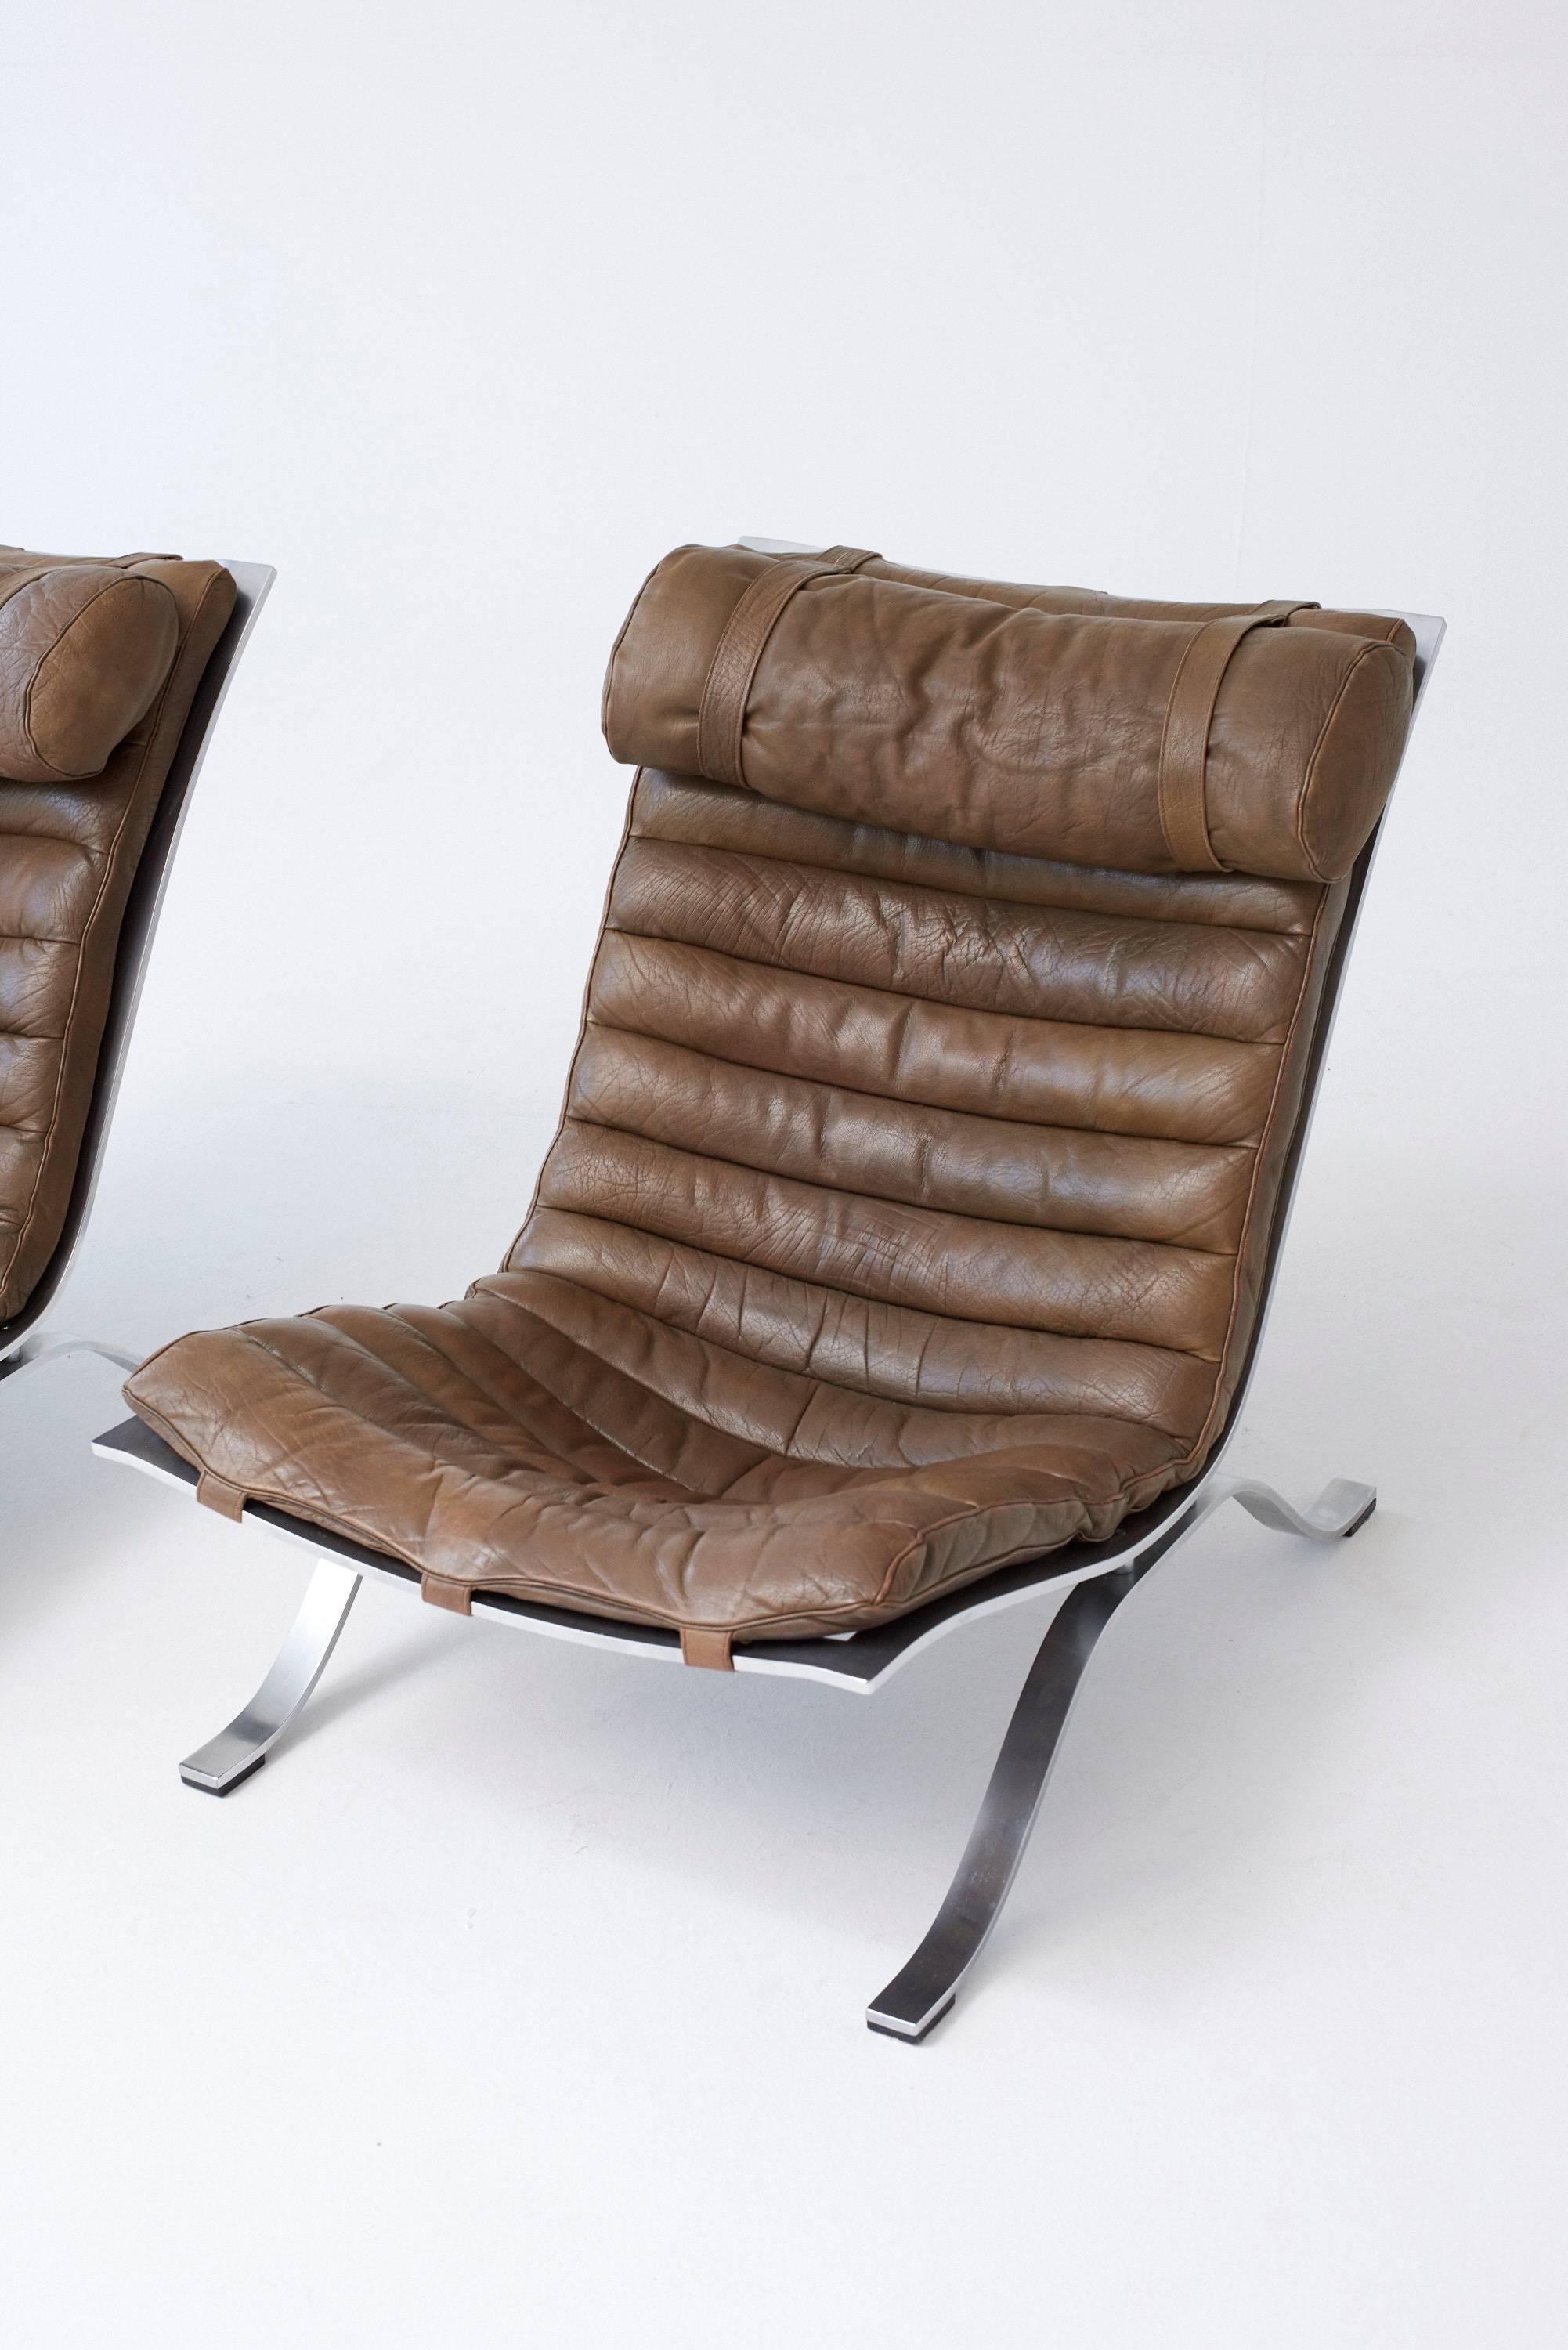 Steel Pair of Arne Norell Ari Chairs, Norell Mobler, Sweden, 1970s